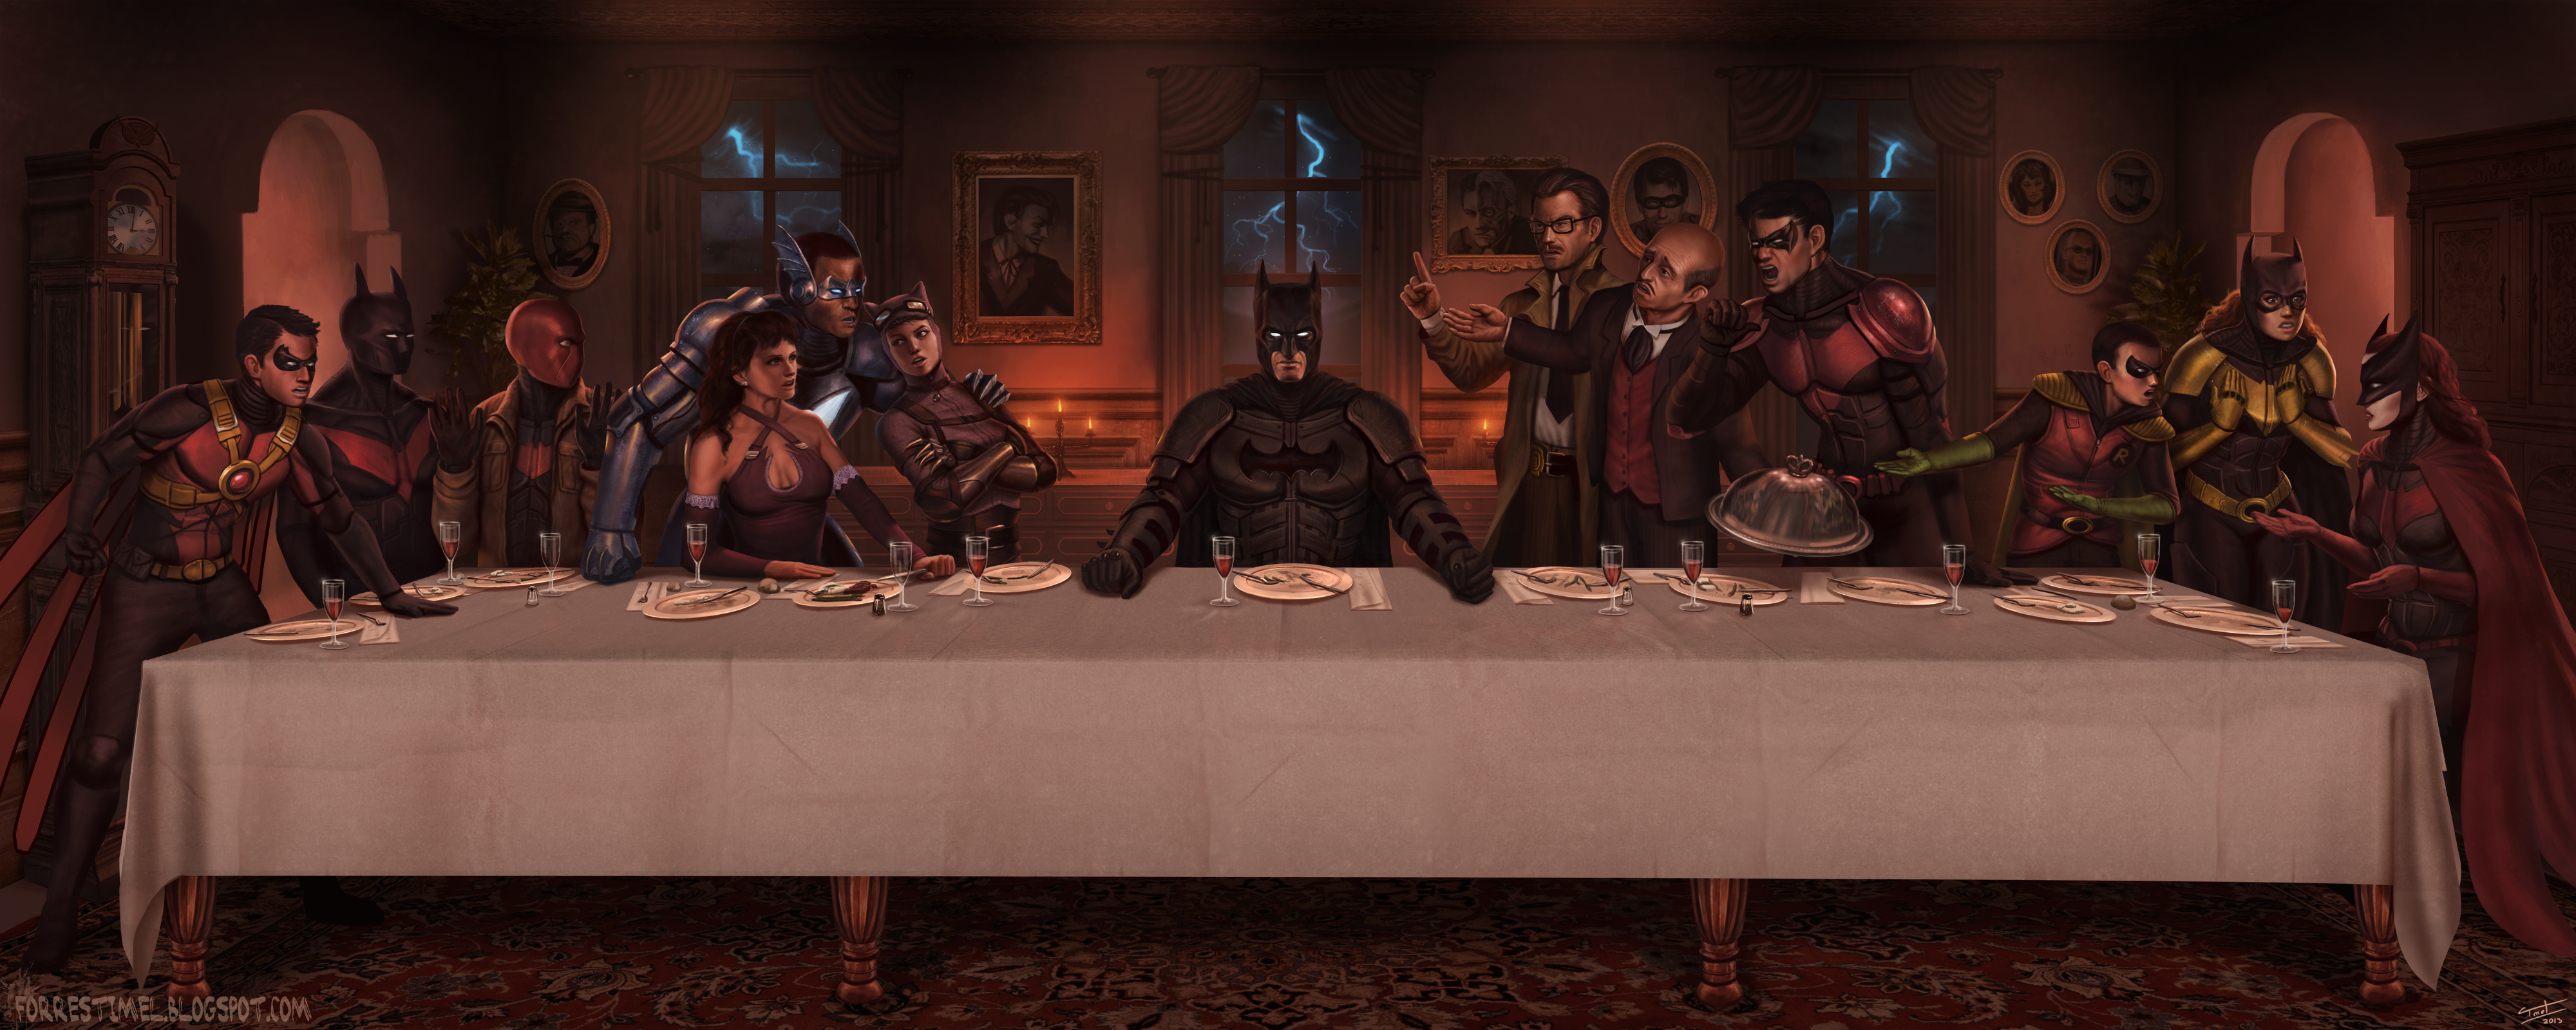 the_last_supper_at_wayne_manor_by_forrestimel-d7491jo